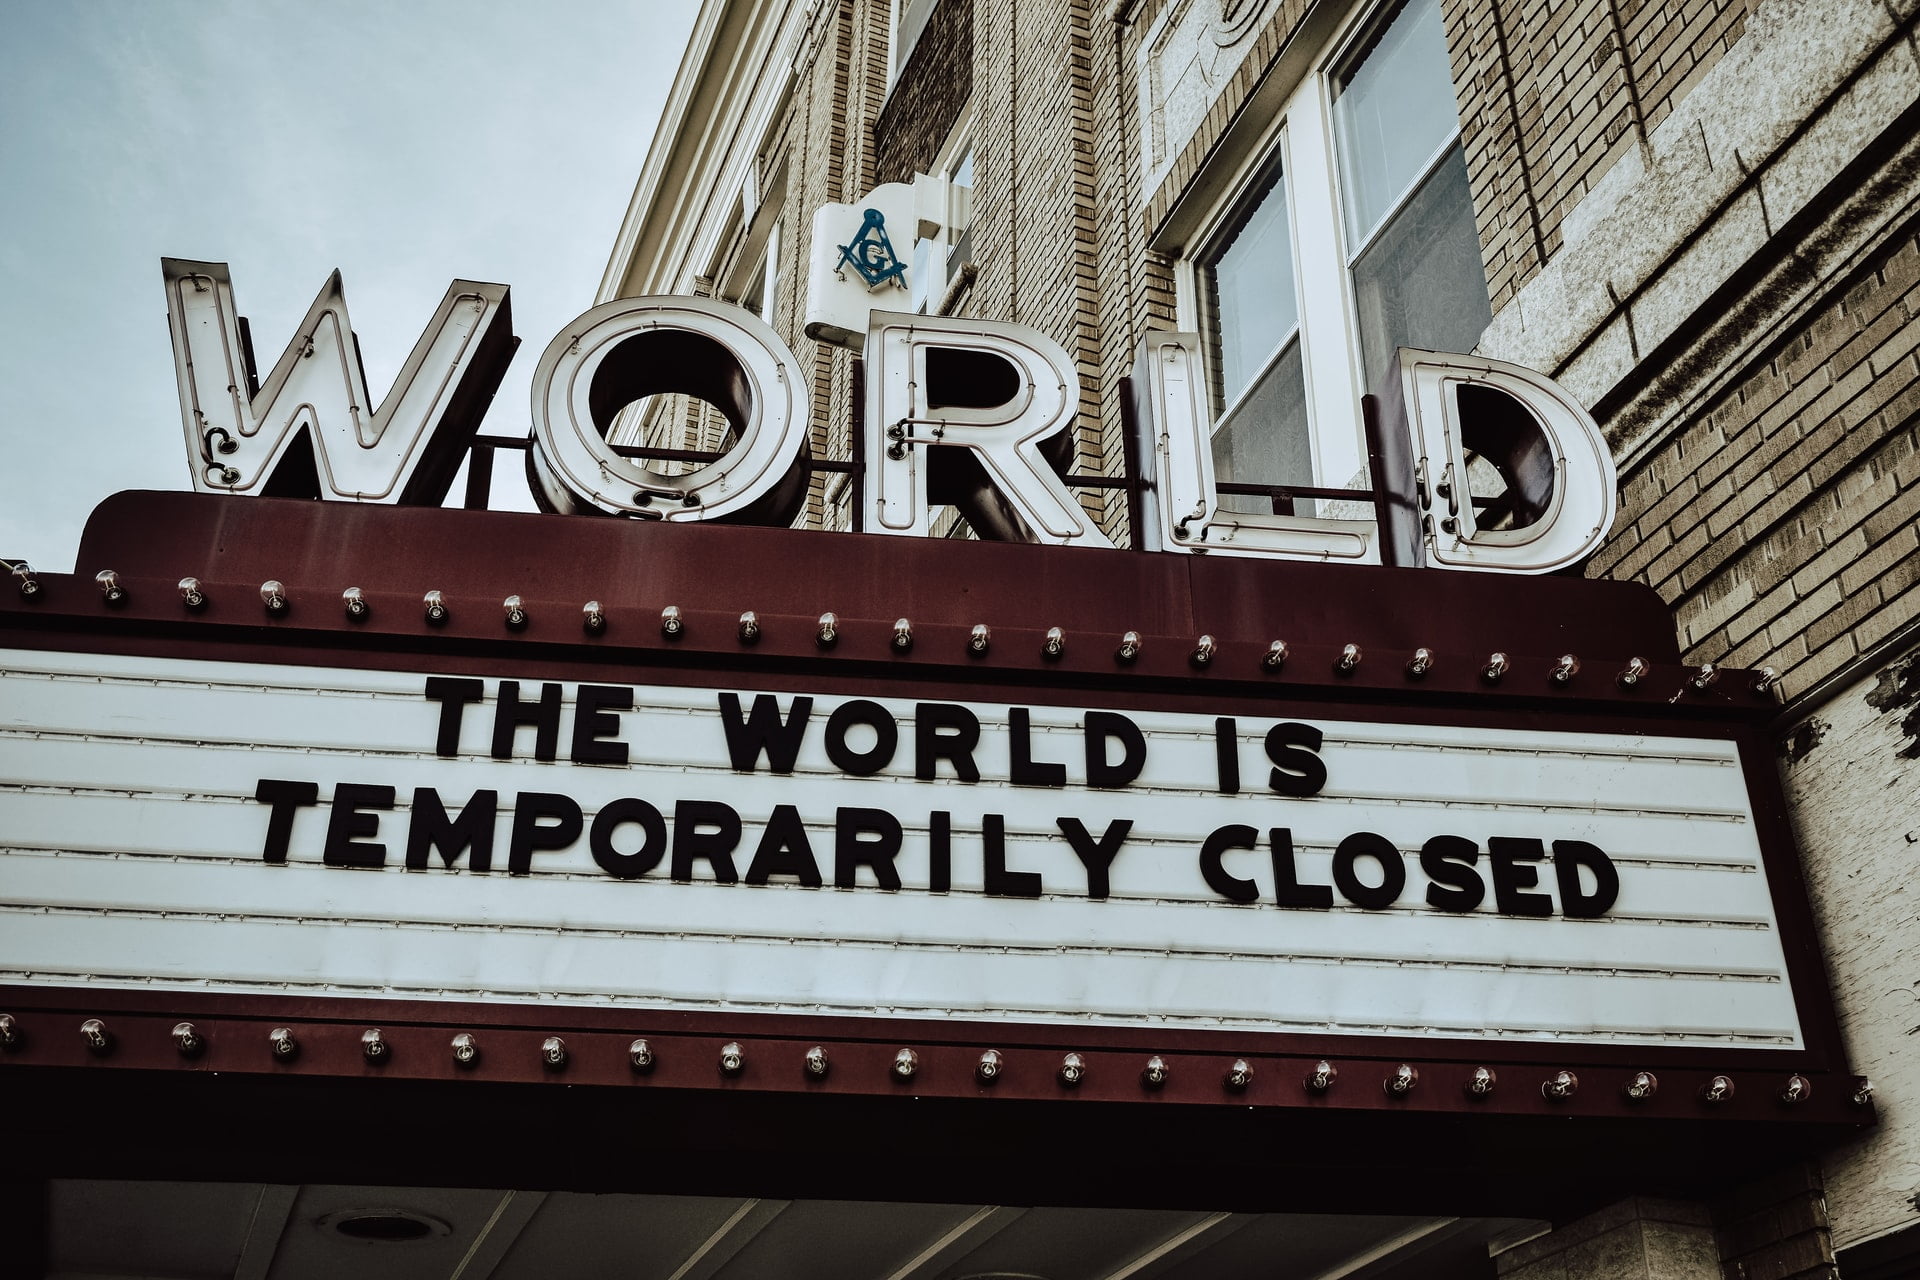 the world is closed - revisionist nostalgia